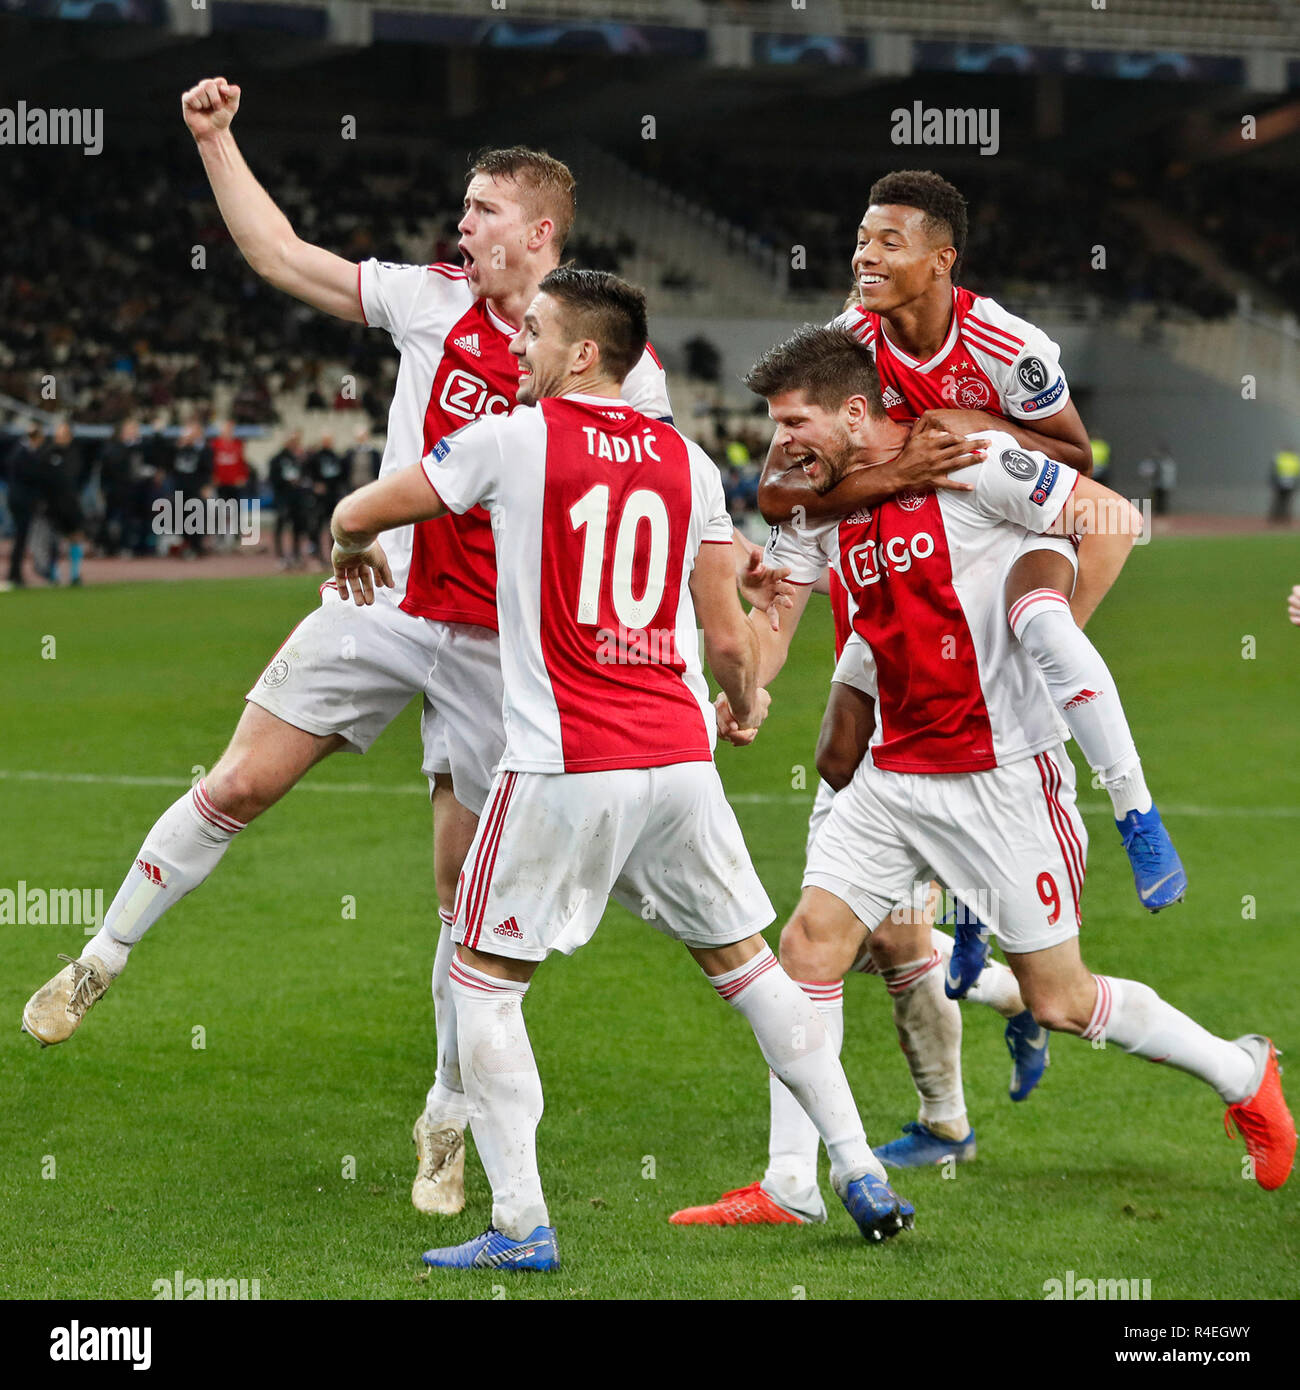 Athens, Greece. 27th November, 2018. ATHENS, Olympic Stadium, AEK Athens FC  - Ajax , football, Champions League, season 2018-2019, 27-11-2018, Ajax  celebrating the victory after the game the game AEK Athens -